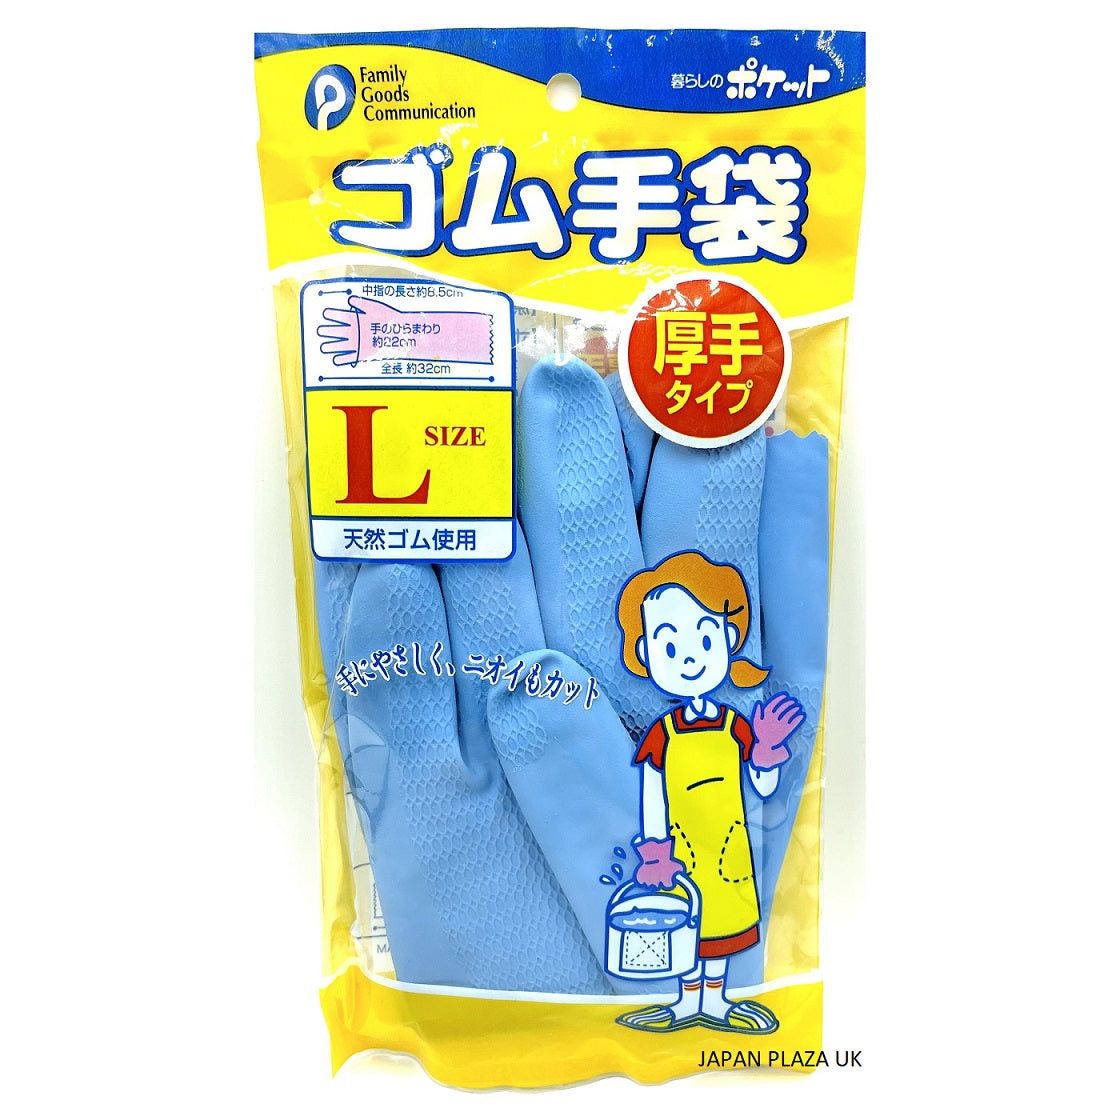 Rubber gloves Thick Size L (Made in Vietnam)